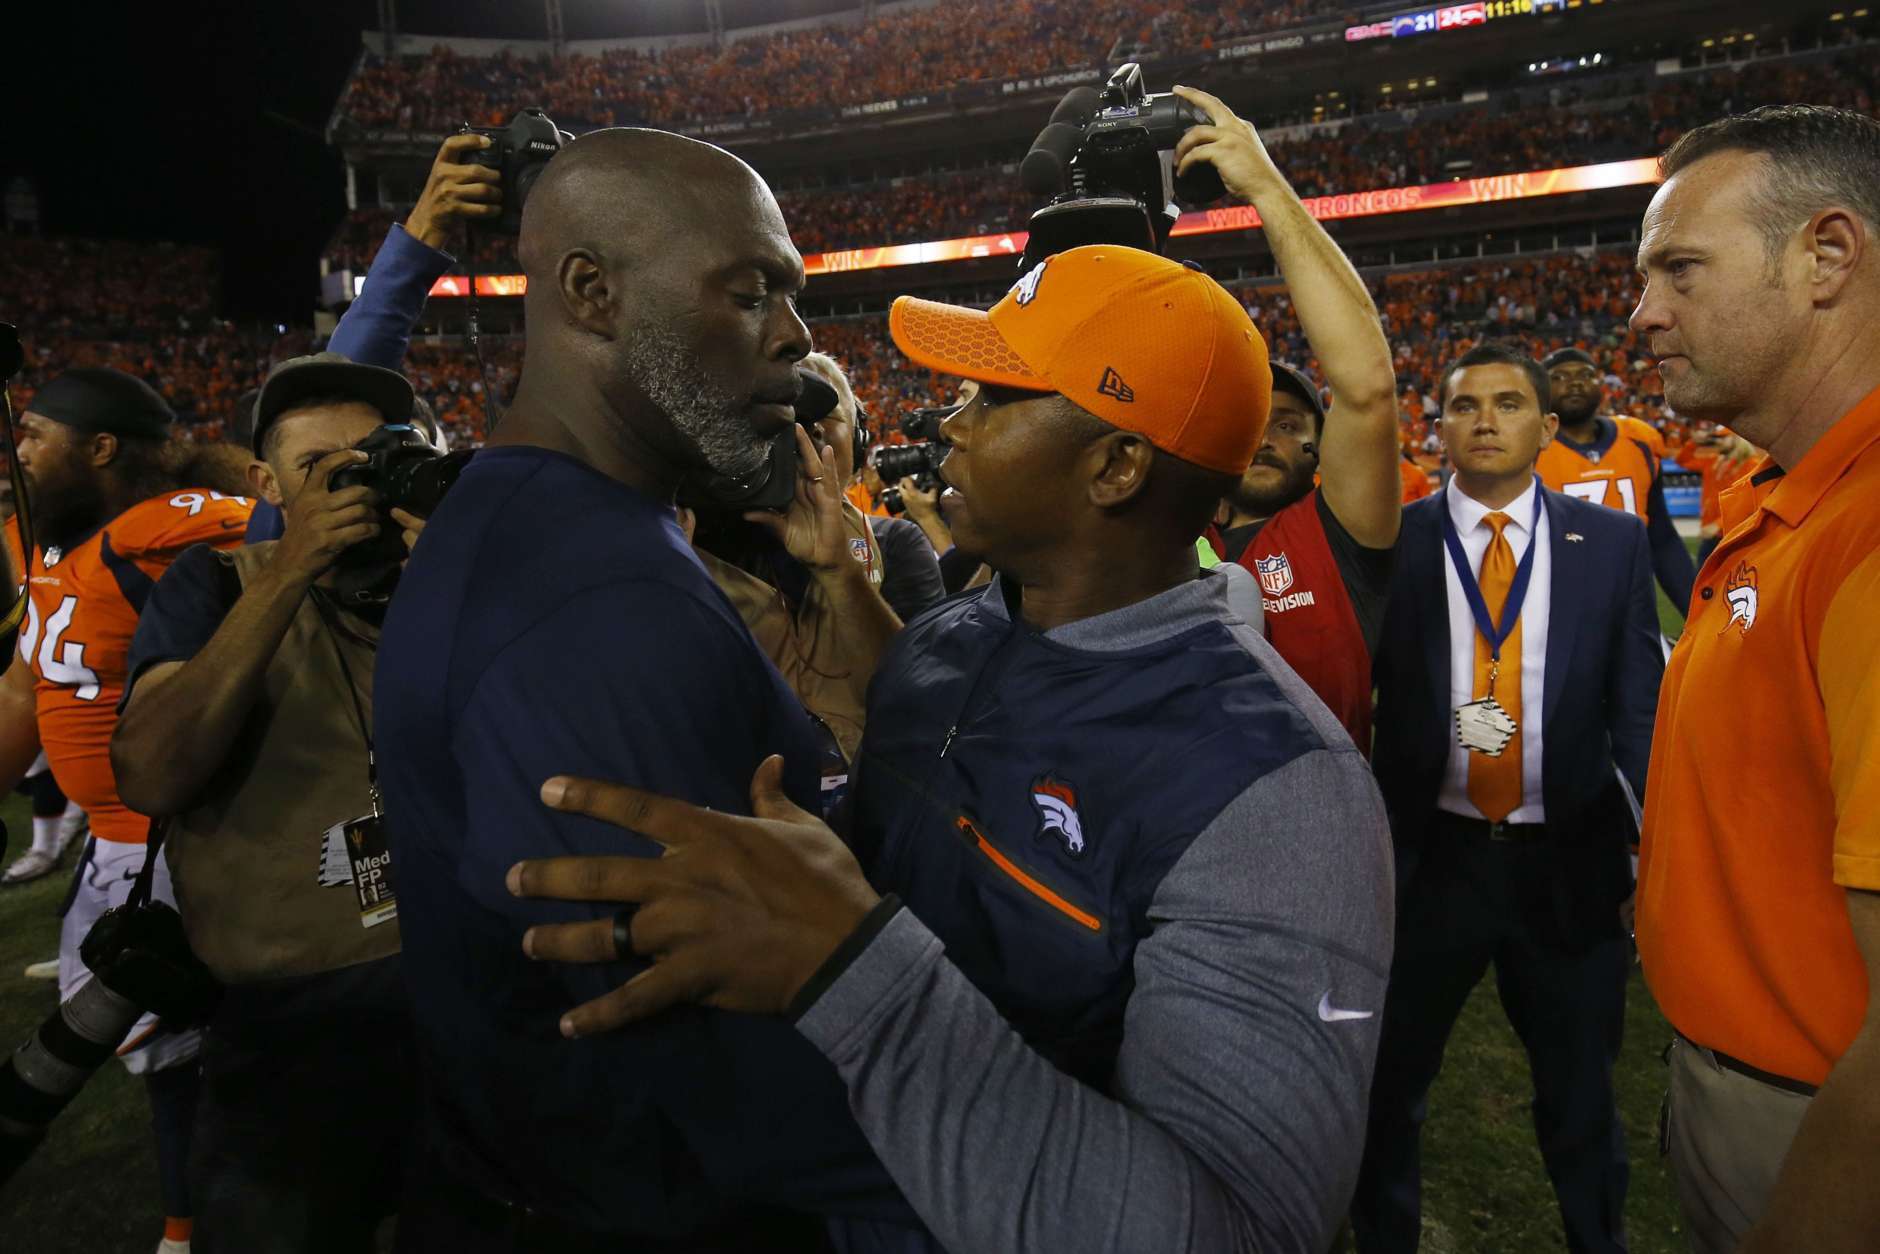 DENVER, CO - SEPTEMBER 11:  Head coach Vance Joseph of the Denver Broncos talks with head coach Anthony Lynn of the Los Angeles Chargers after the Denver Broncos won the game at Sports Authority Field at Mile High on September 11, 2017 in Denver, Colorado. (Photo by Justin Edmonds/Getty Images)